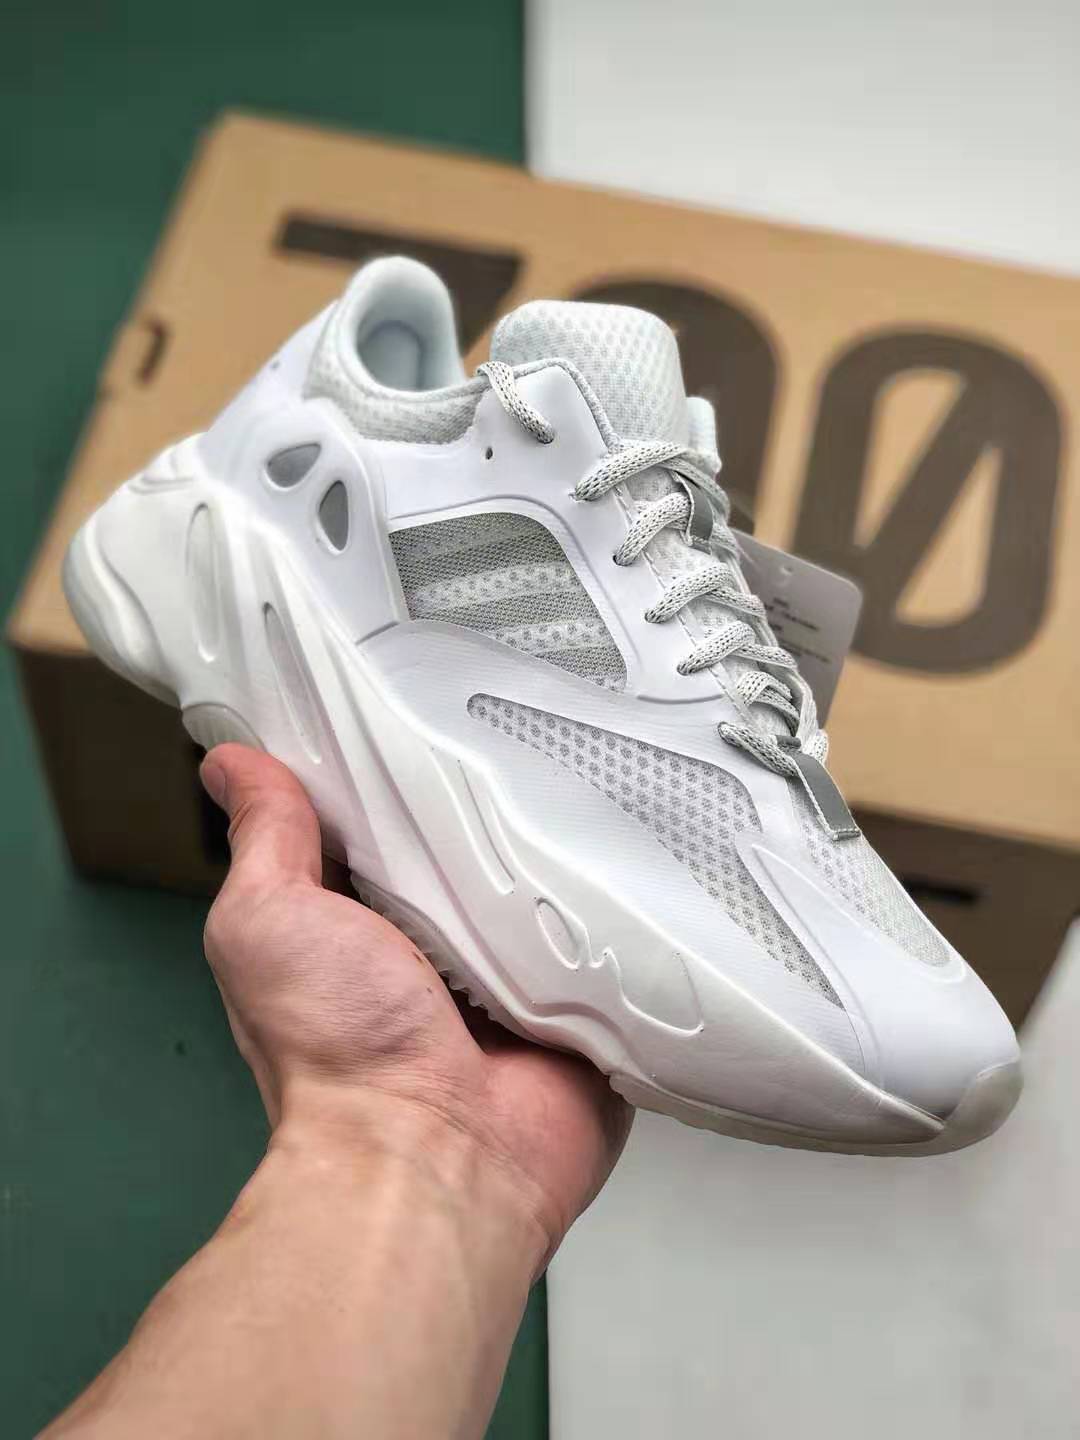 Adidas Yeezy Boost 700 'White Glow' EG6990 - Shop Now for the Hottest Sneaker Release!